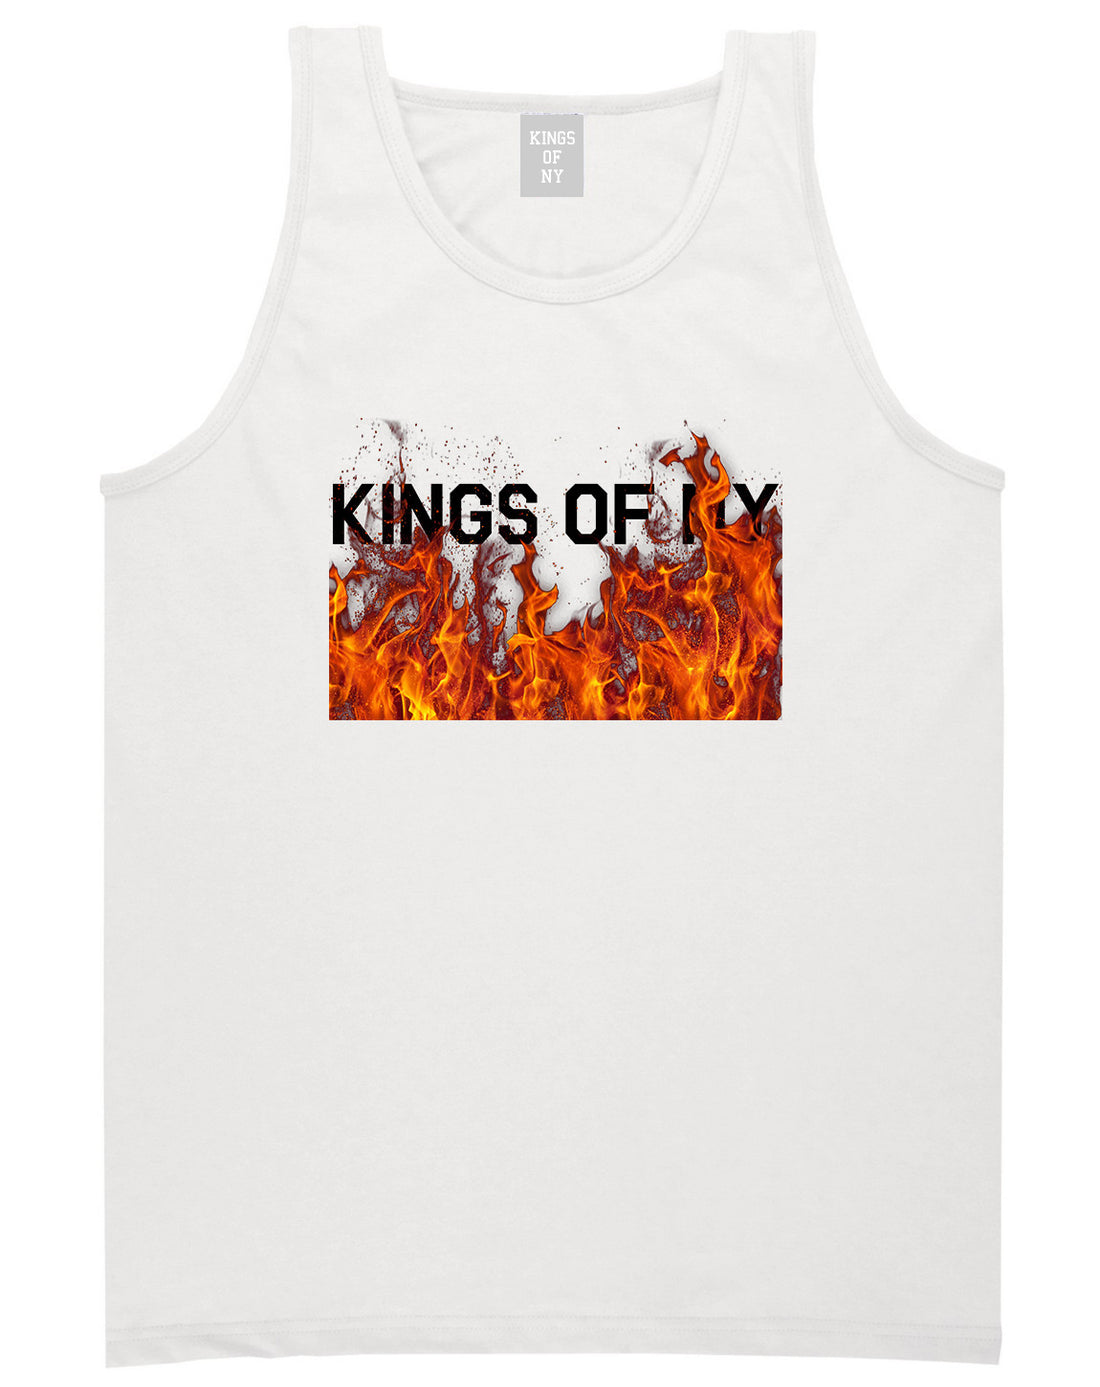 Rising From The Flames Tank Top in White